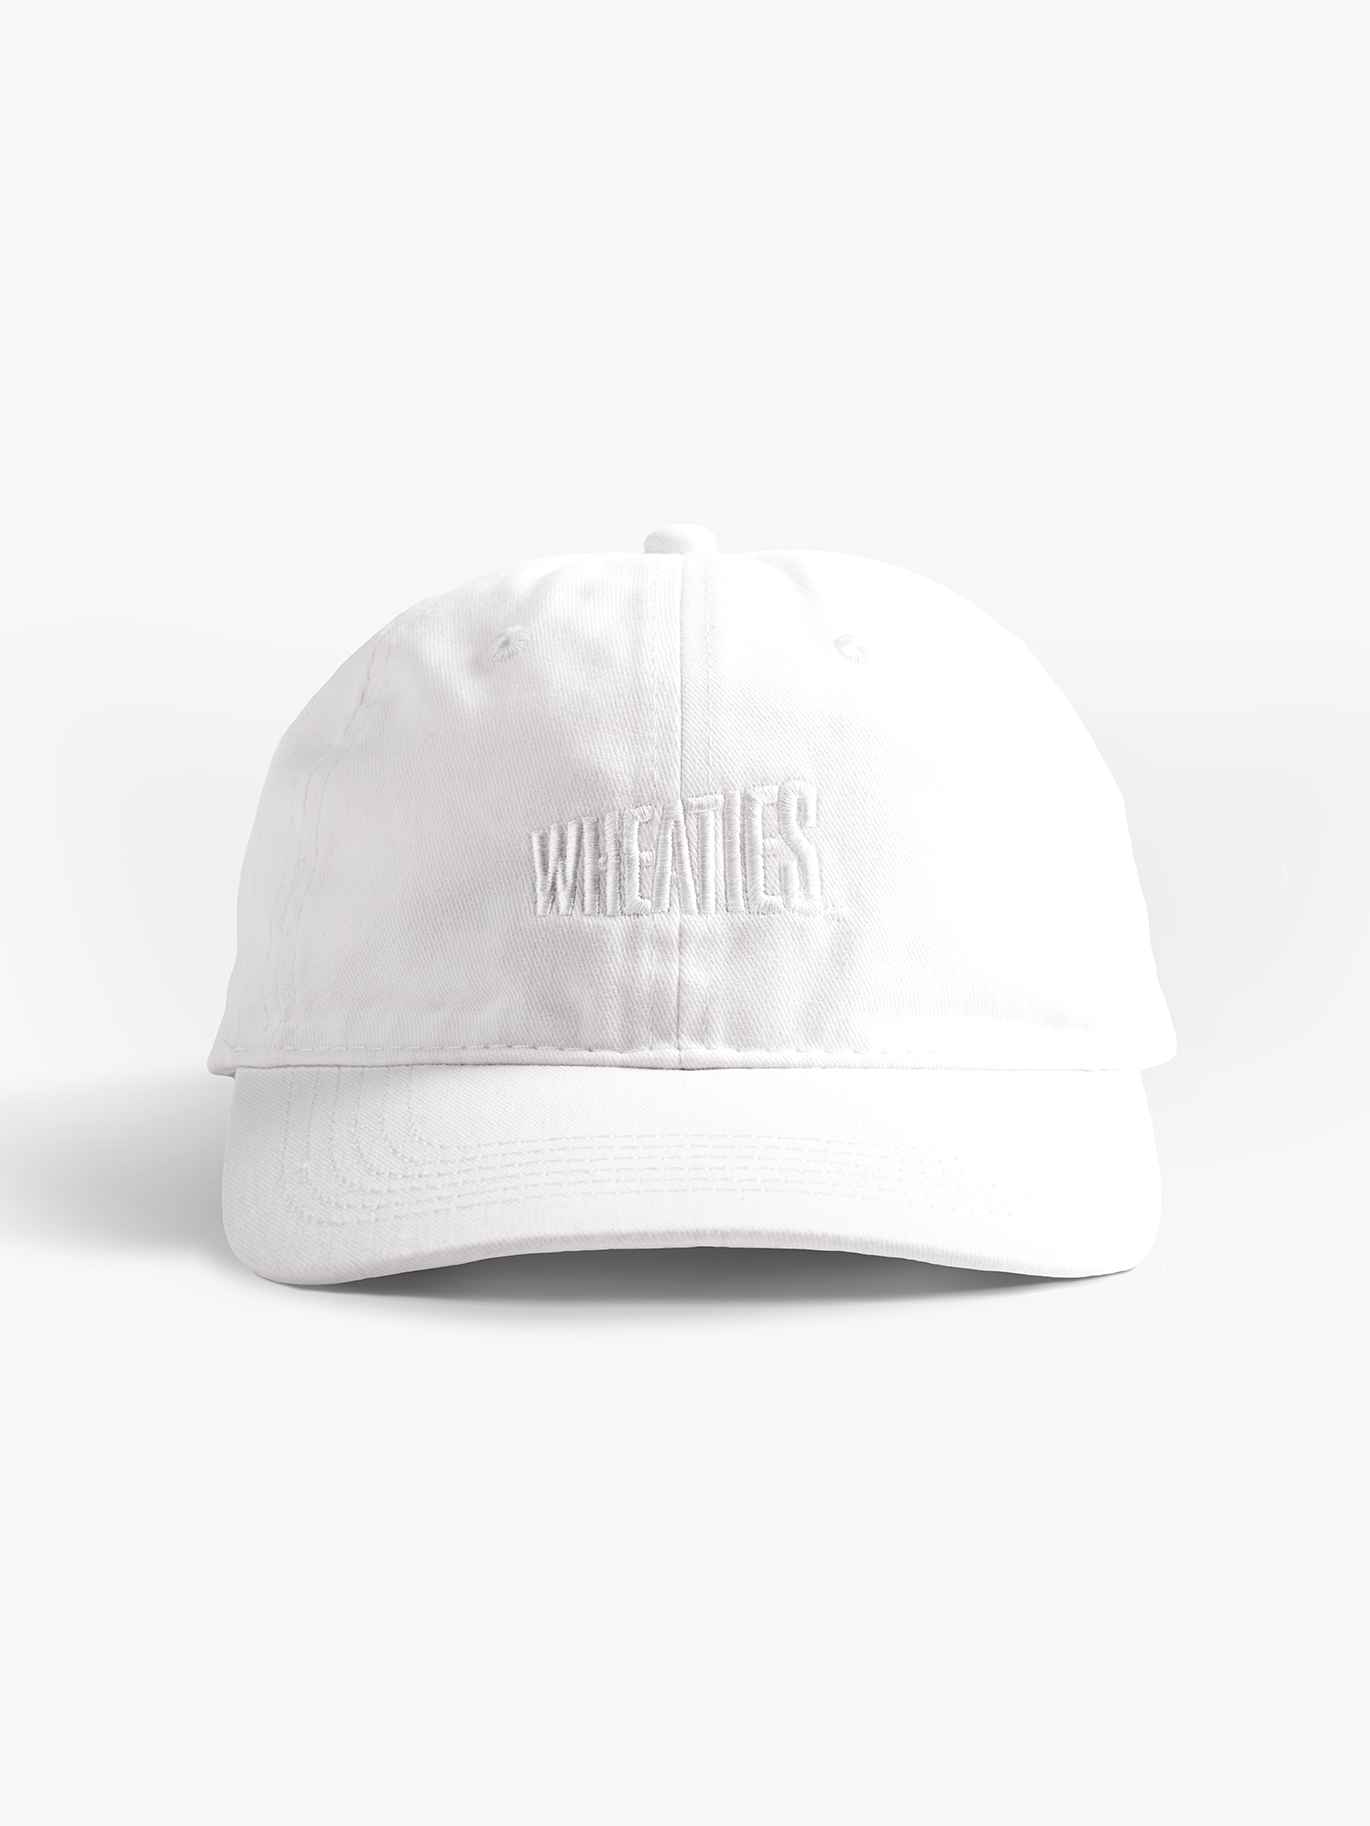 Not Your Dad's Hat